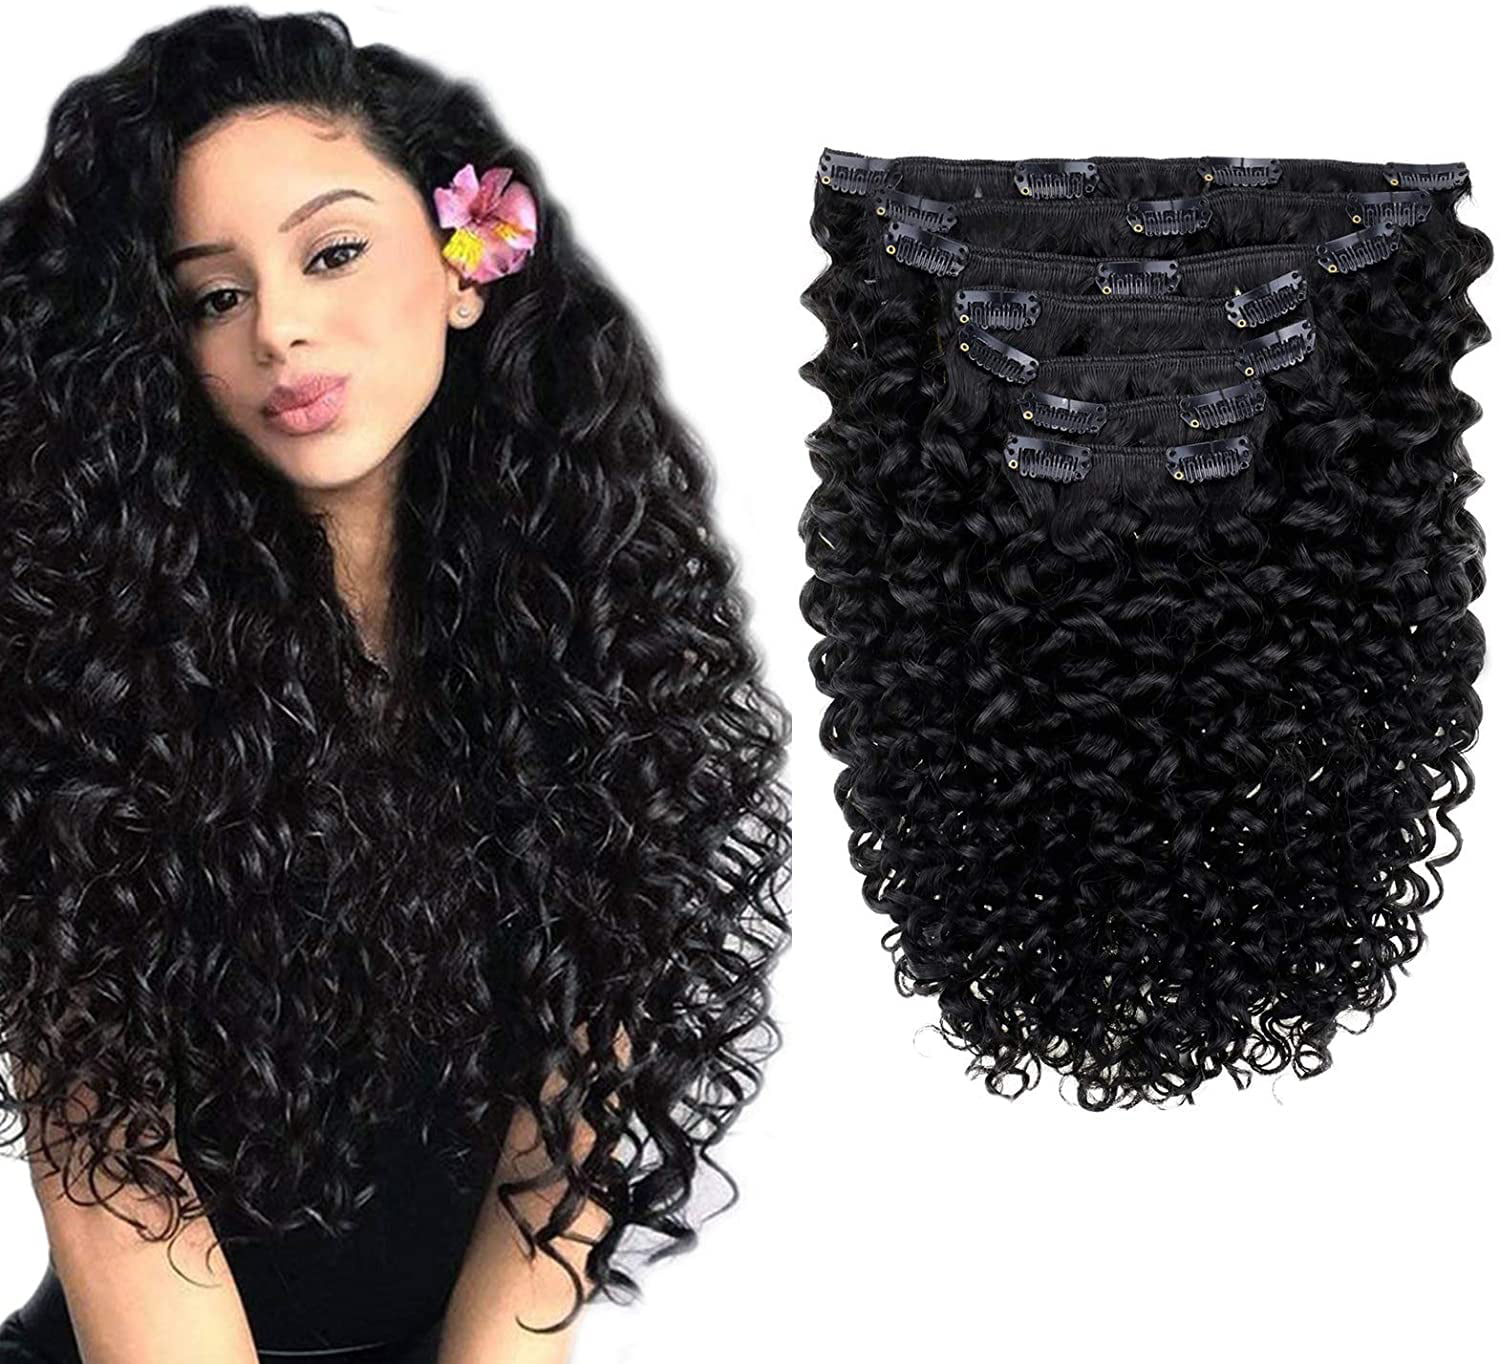 Honbon Stylish Natural Curly Wig Step Cutting Casual Hair Extension in  Plastic Clutcher Black Pack of